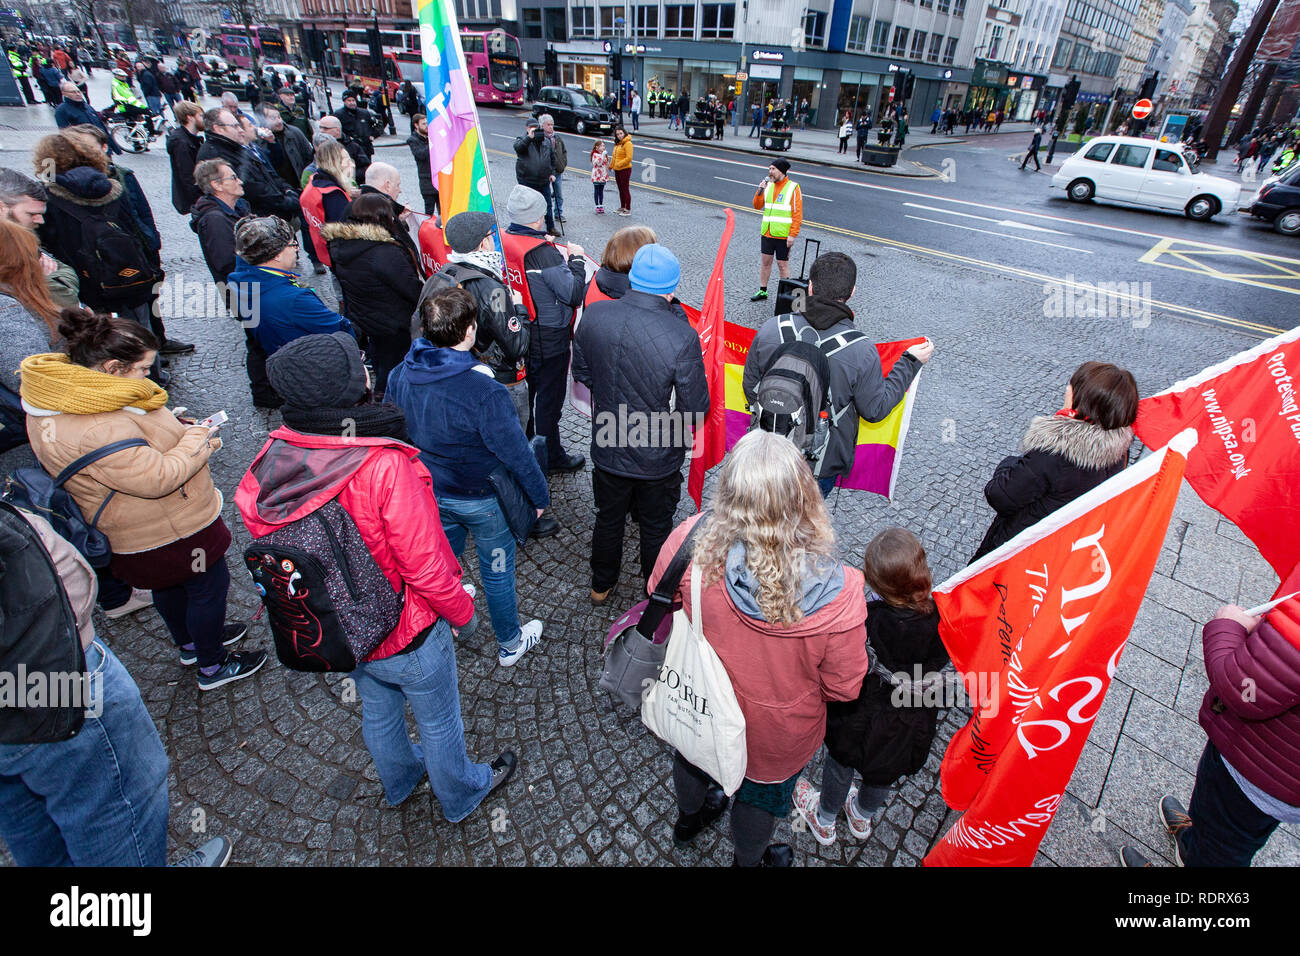 City Hall Belfast, 19/01/2019 Members of the NIPSA Union held an Anti Fascist protest at Belfast City Hall Various Speakers From several different organisations including  NIPSA Union and  People Before Profit (PBP) addressed a small crowd speaking on the topic of fighting Racism from Fascist groups within Northern Ireland Credit: Bonzo/Alamy Live News Stock Photo